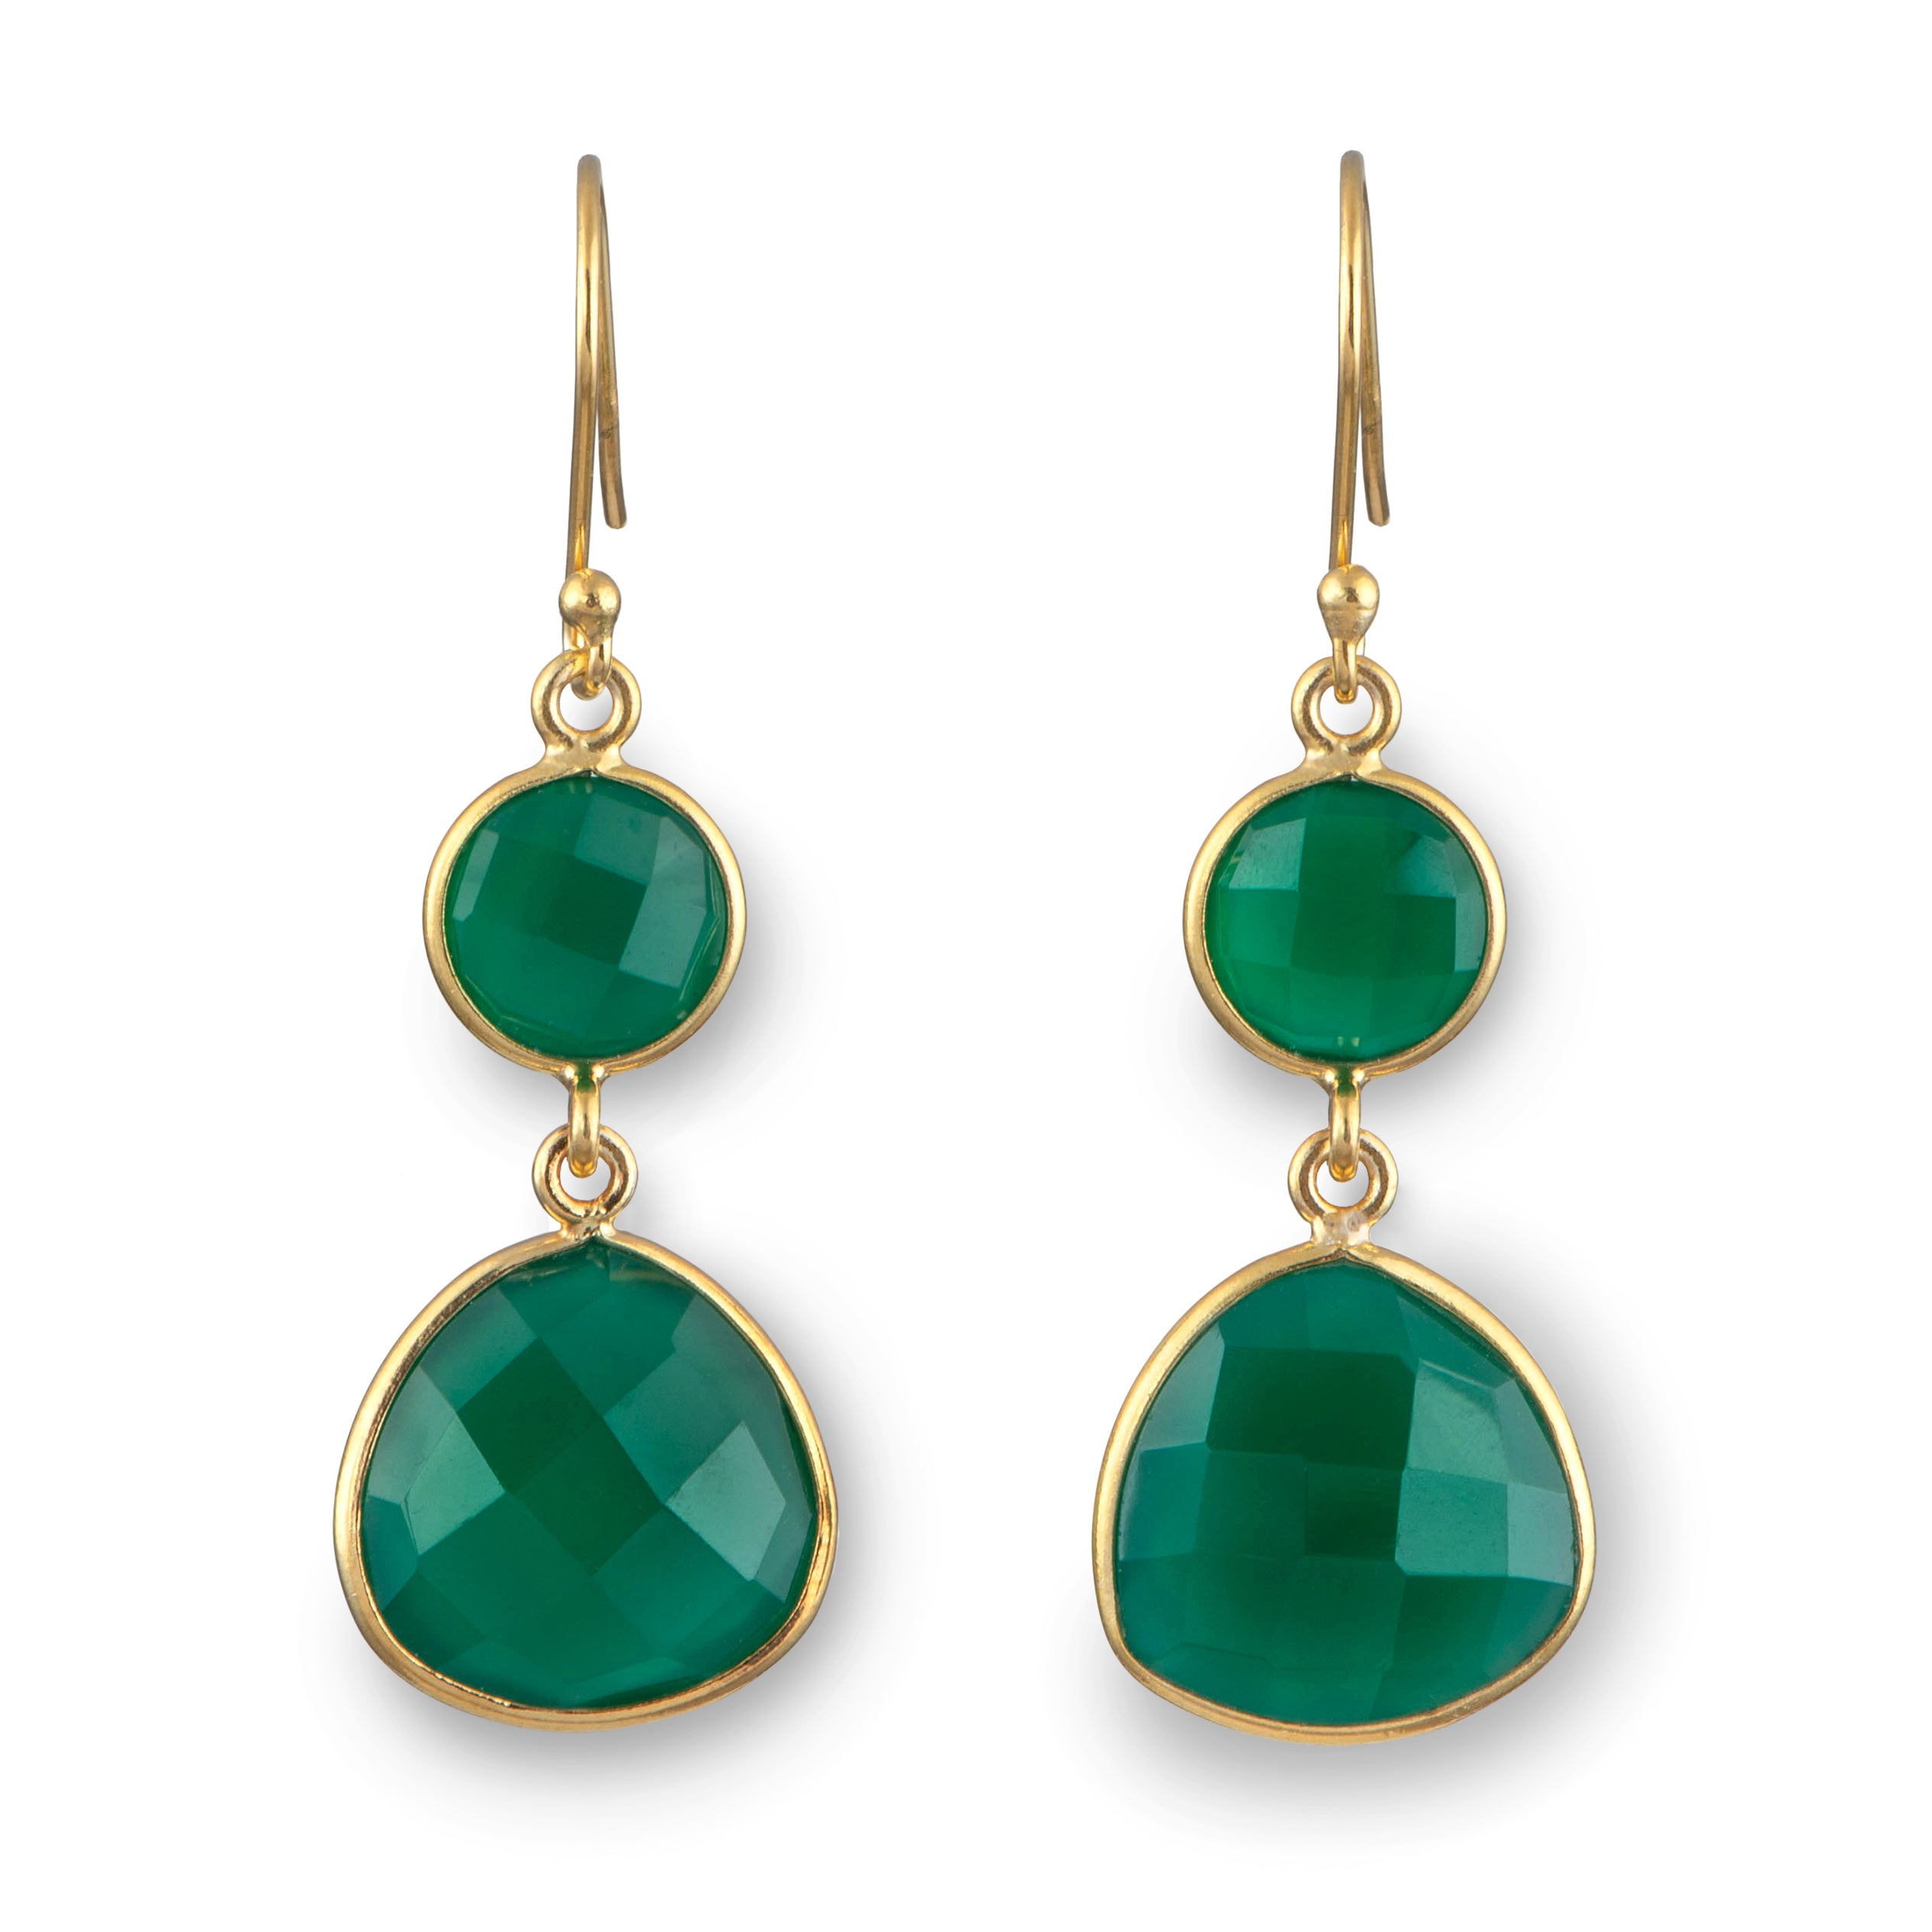 Green Onyx Gemstone Earrings in Gold Plated Sterling Silver - Triangular